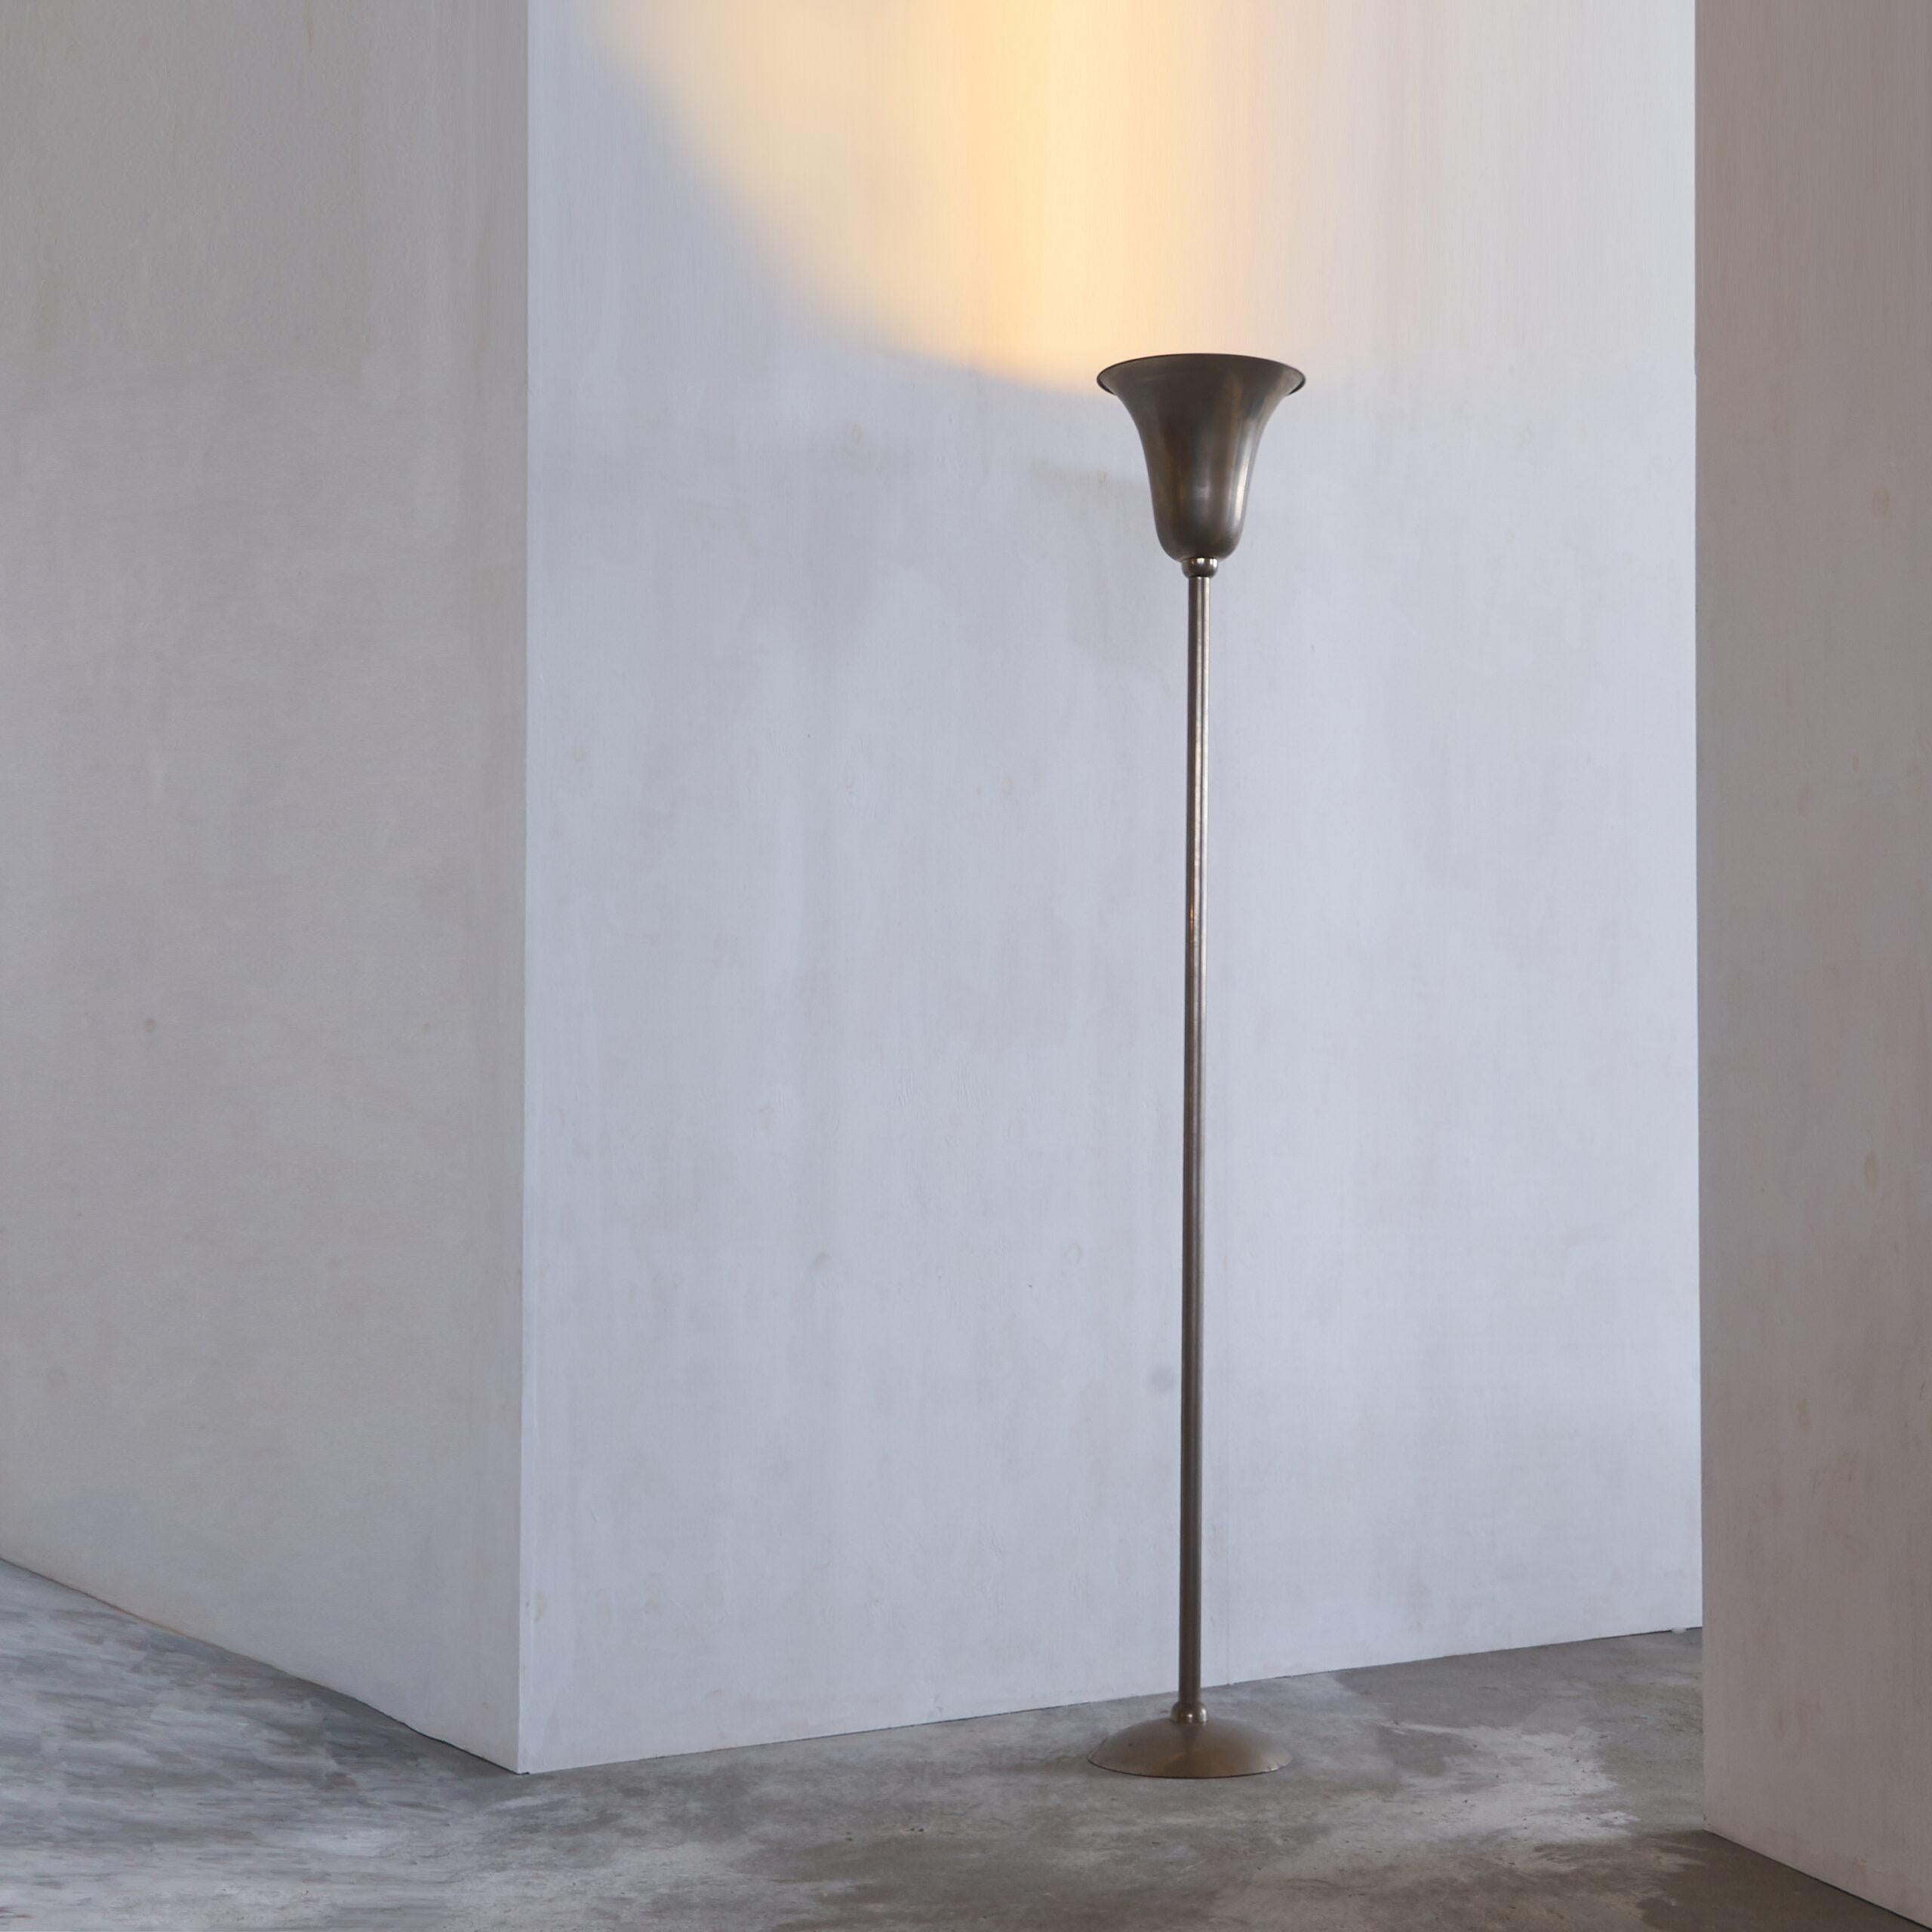 Very elegant early torchiere by Gispen from The Netherlands.

This striking 1930’s floor lamp is reminiscent to classicism and modernism at the very same time. The bell shaped cone and the understated foot make a great combination. The modest